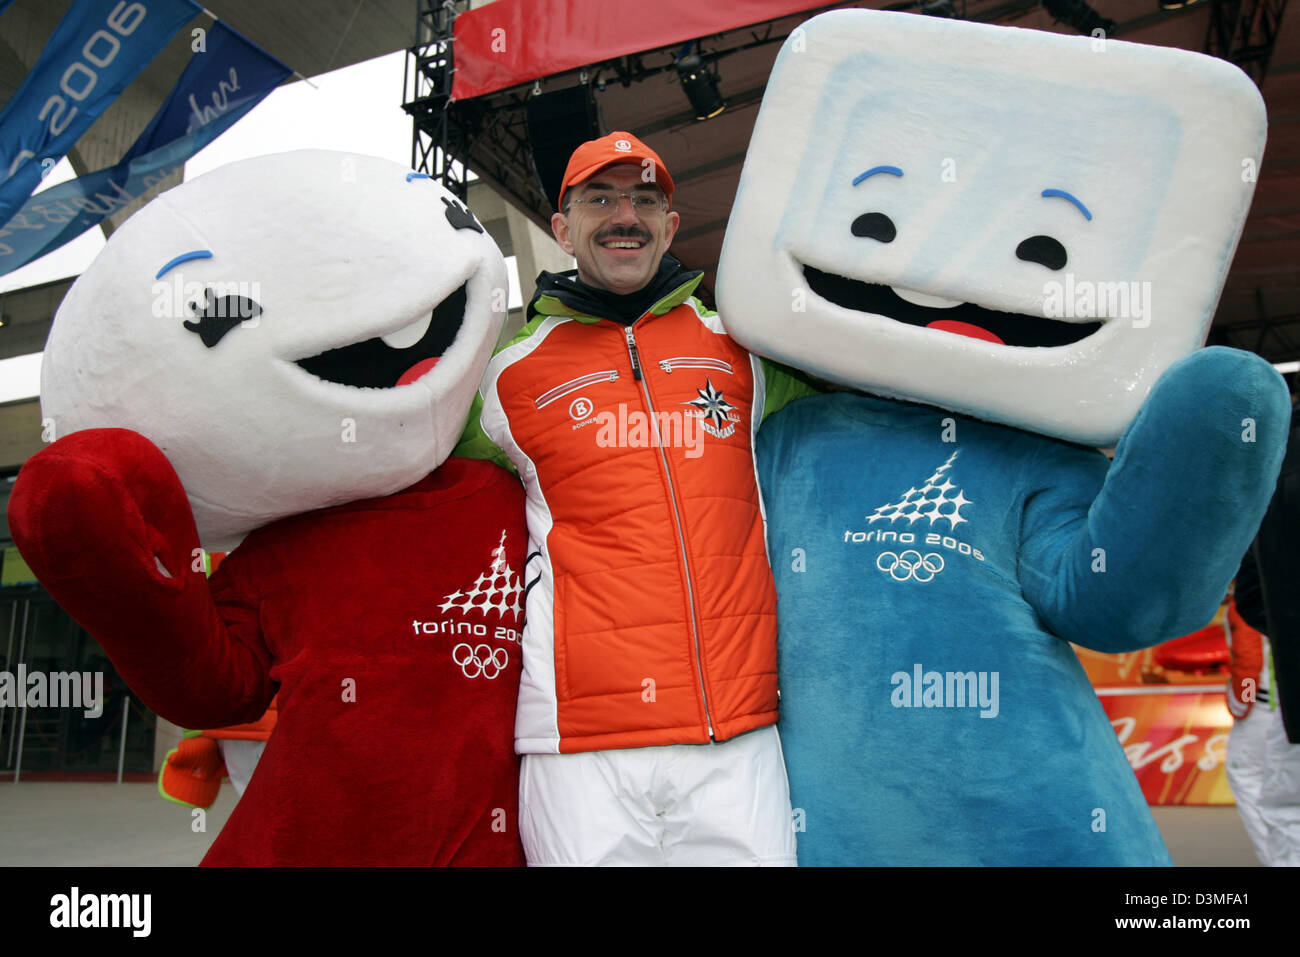 (dpa file) - The President of the National Olympic Committee of Germany (NOK), Klaus Steinbach, poses with the Olympic mascots Gliz (R) and Neve in the Olympic village in Turin, Italy, 07 February 2006. In a press conference on Saturday 25 February 2006 Steinbach stroke a very positive balance regarding the performance of the German Olympic team. Photo: Frank May Stock Photo